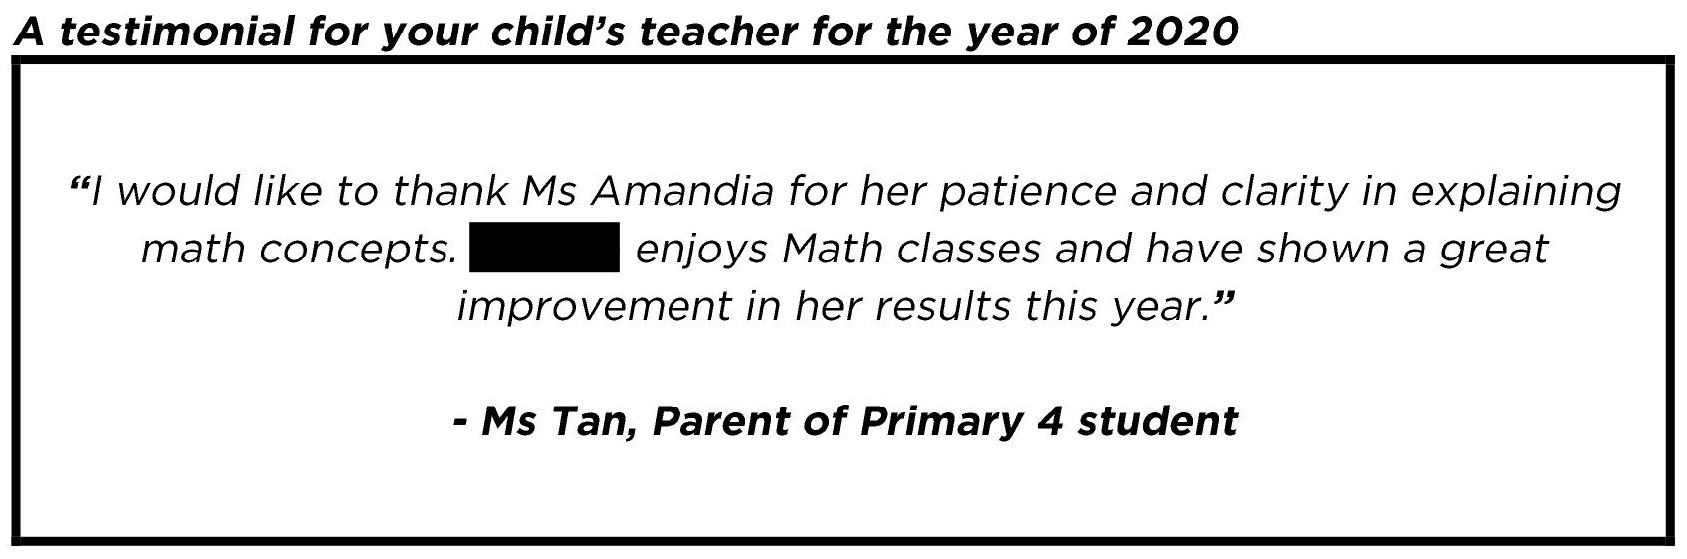 "...enjoys Math classes and have shown a great improvement in her results this year."